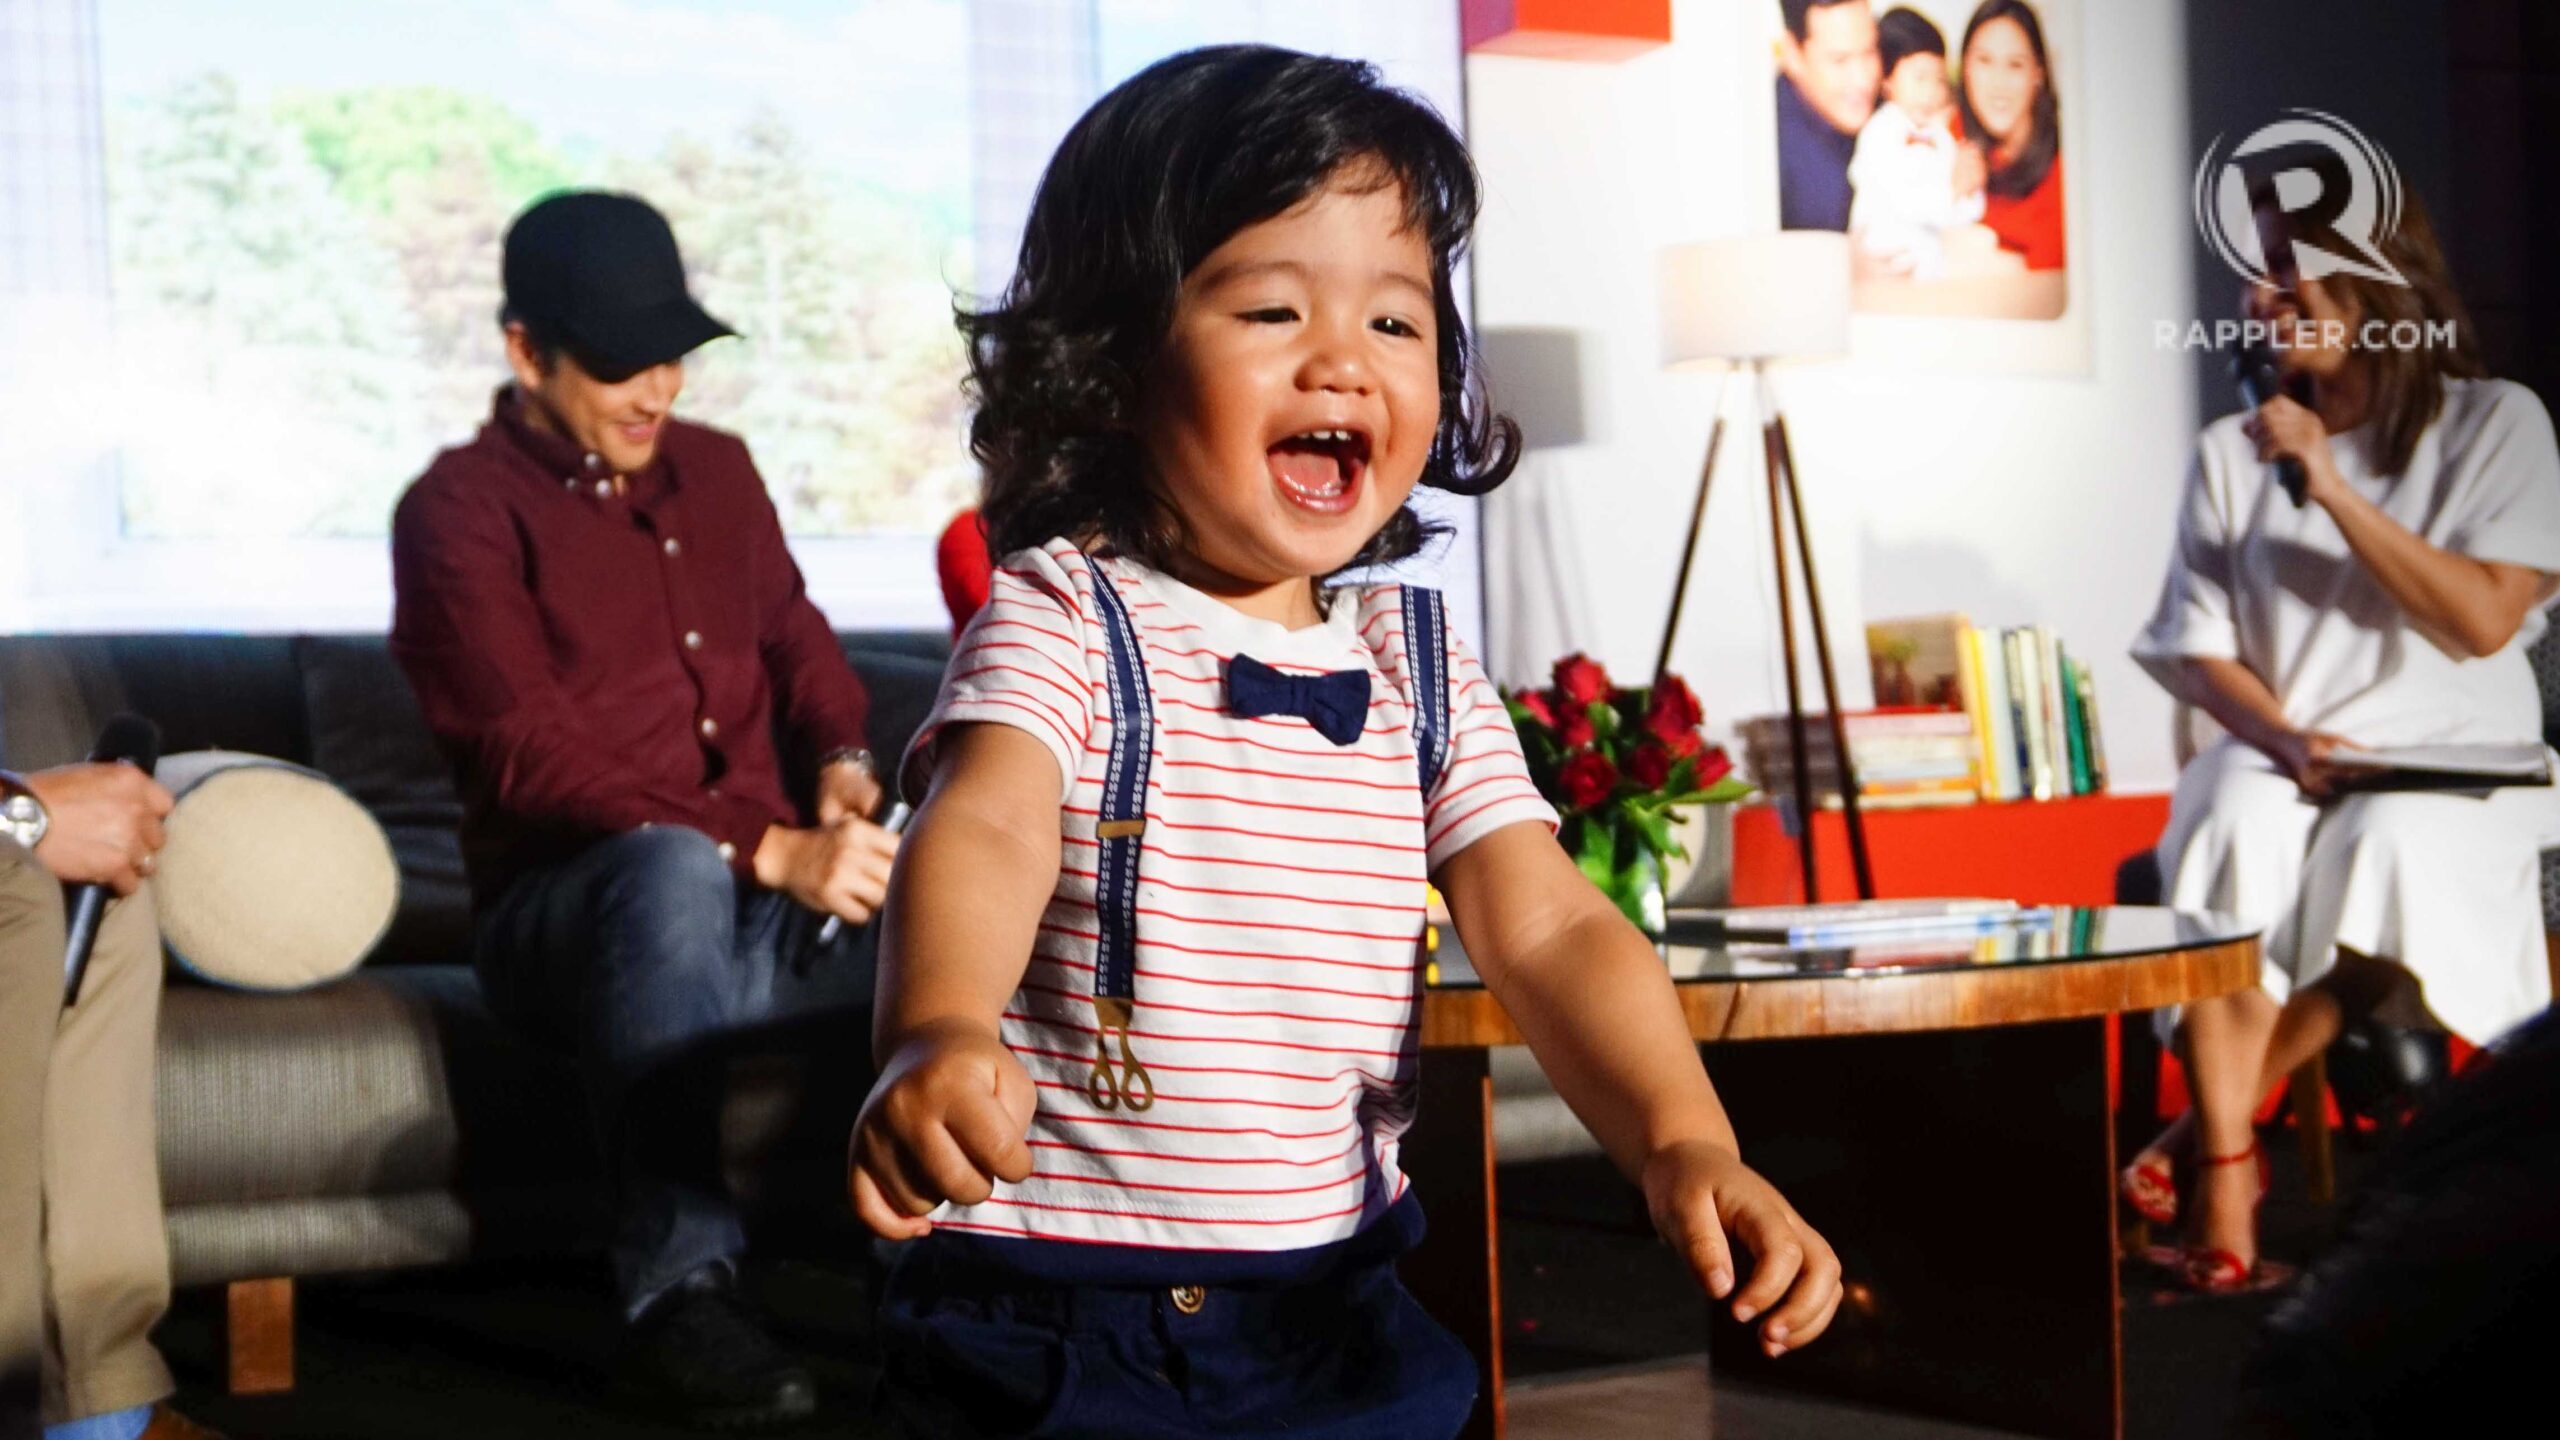 A day in the life of baby Seve Soriano